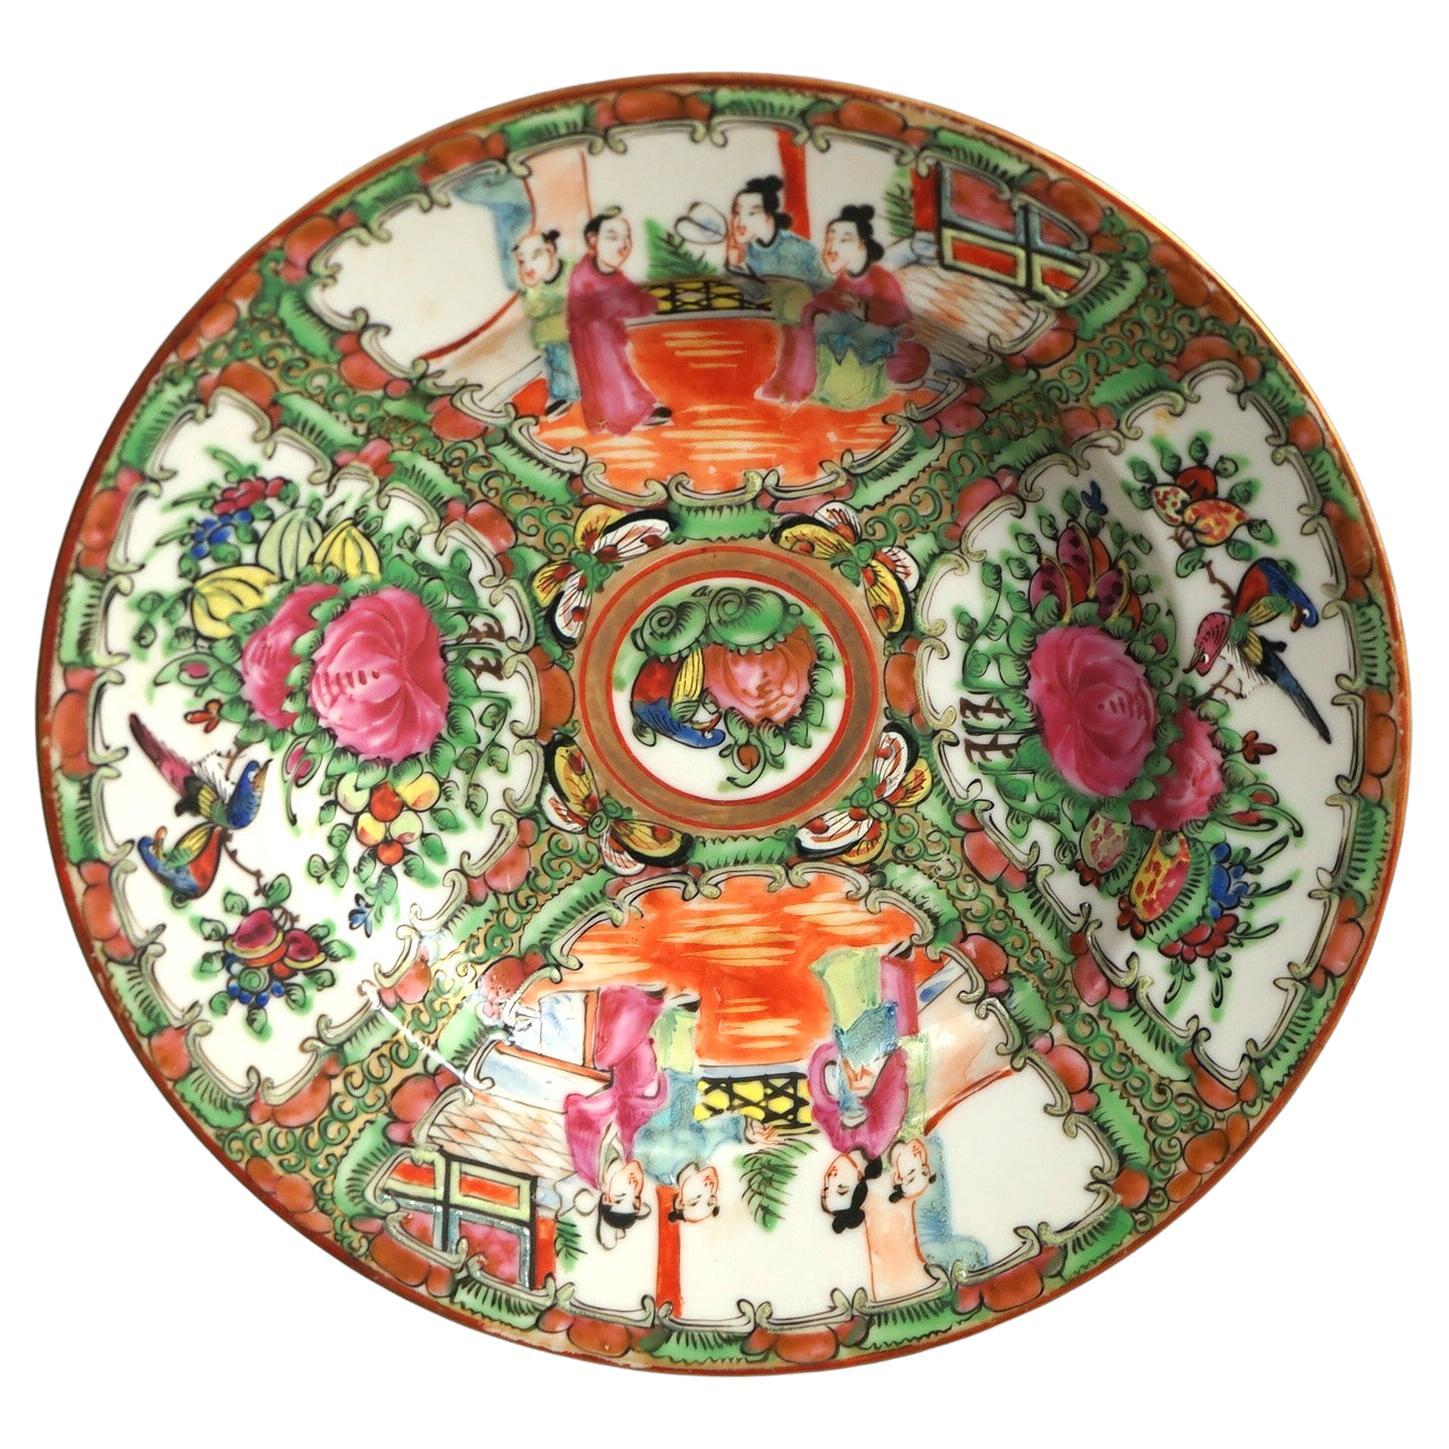 Antique Chinese Rose Medallion Porcelain Bowl with Gardens & Figures C1900 For Sale